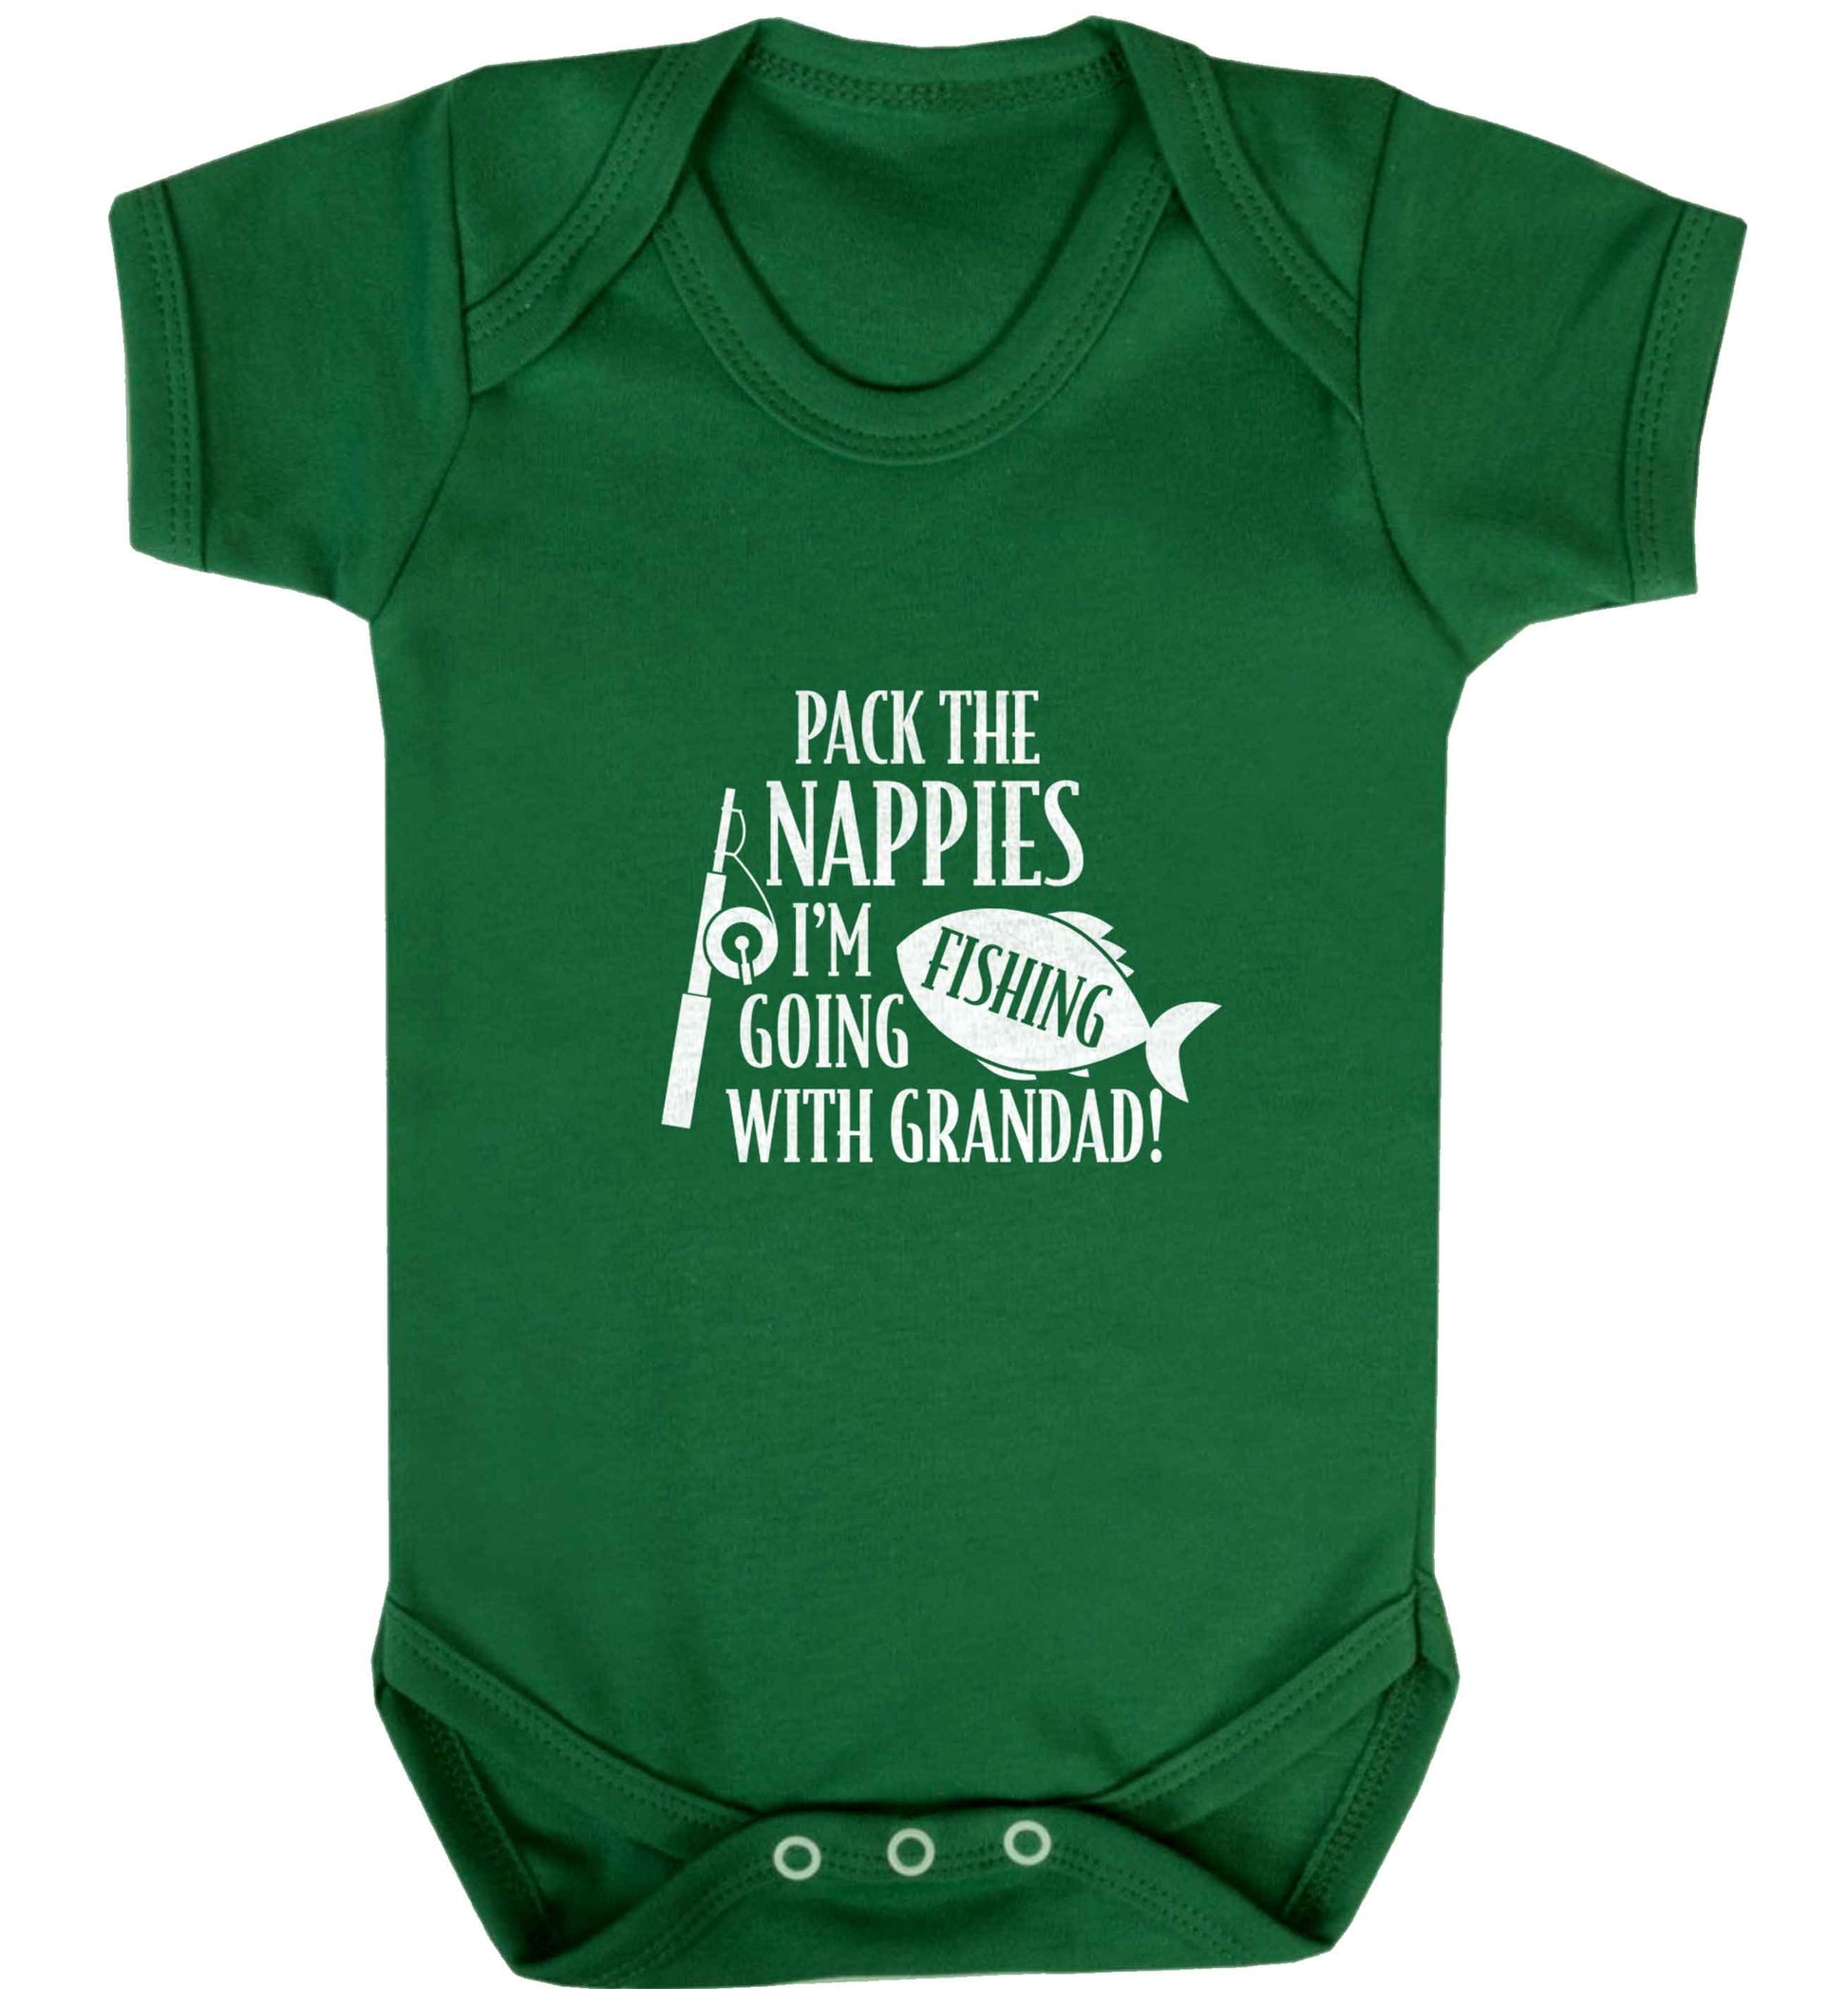 Pack the nappies I'm going fishing with Grandad baby vest green 18-24 months